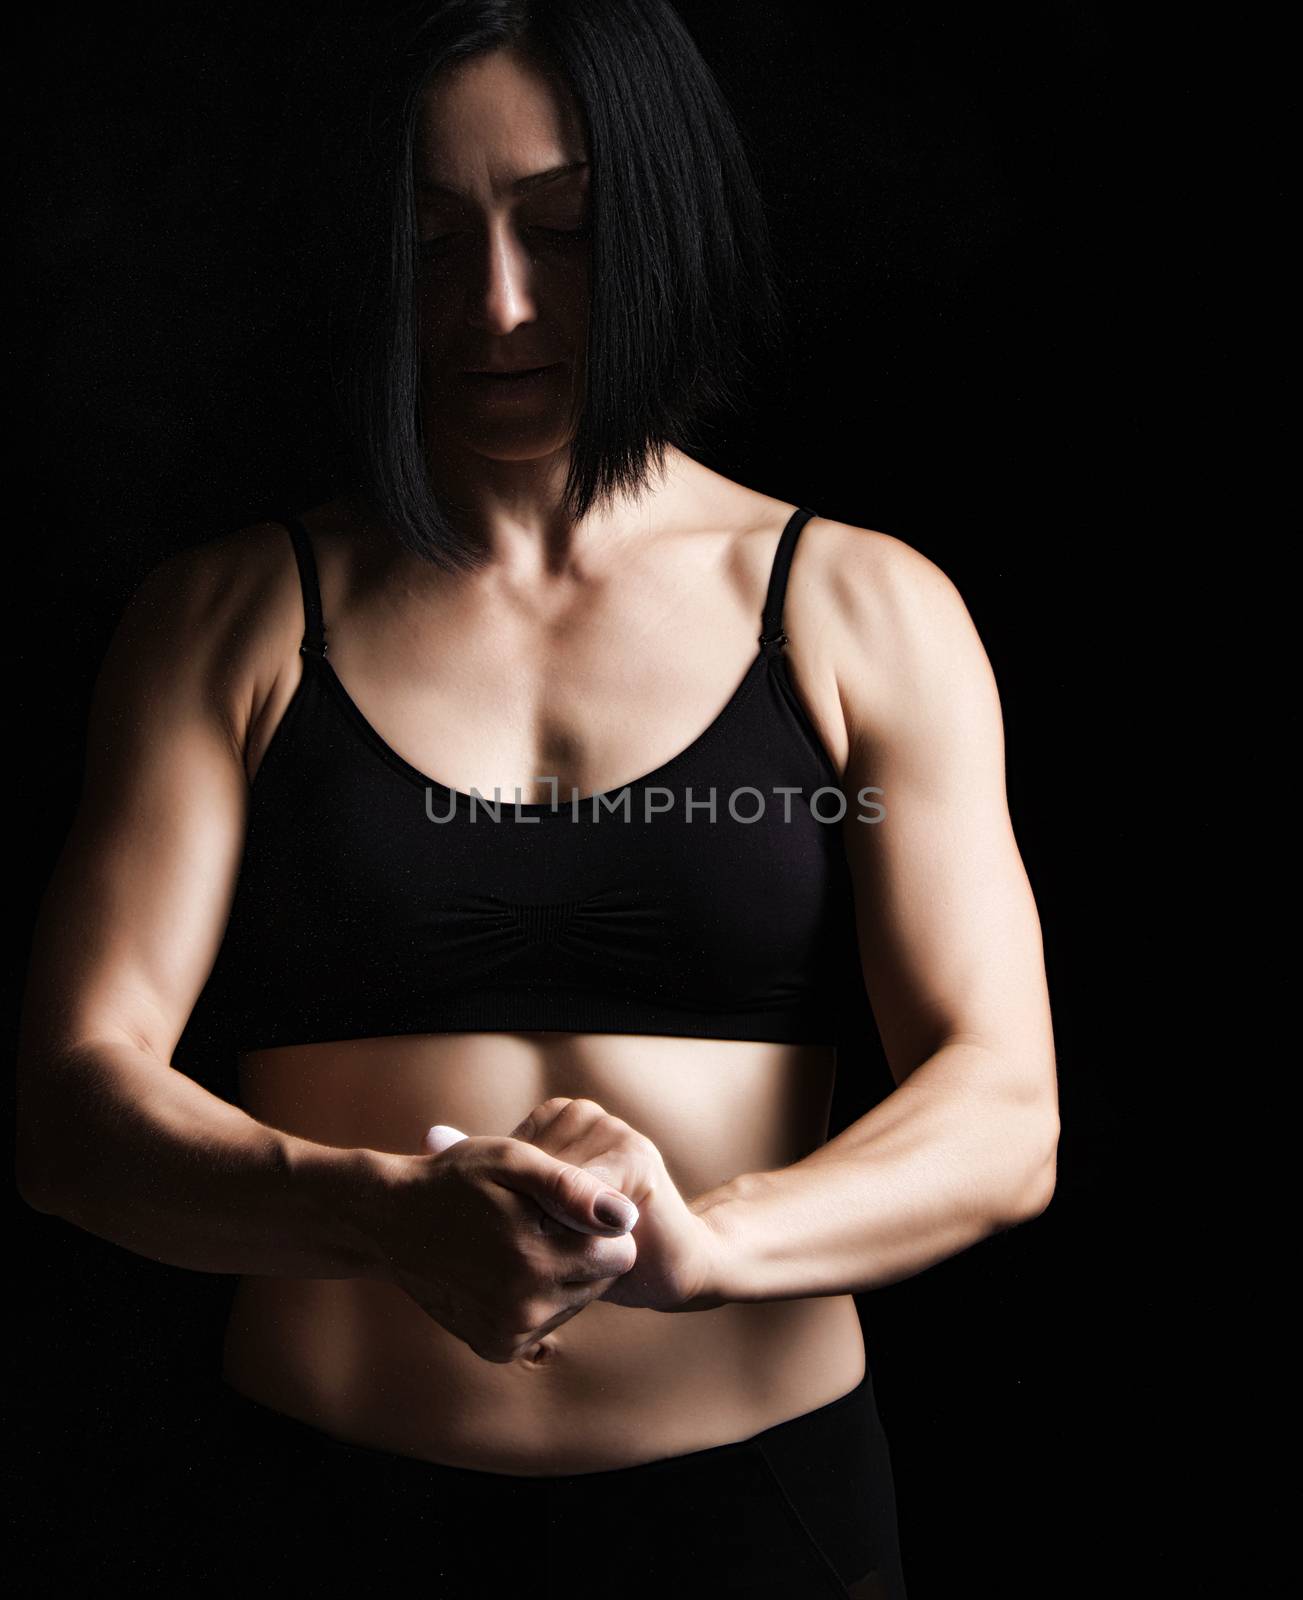 beautiful young girl with a sports figure dressed in a black top by ndanko